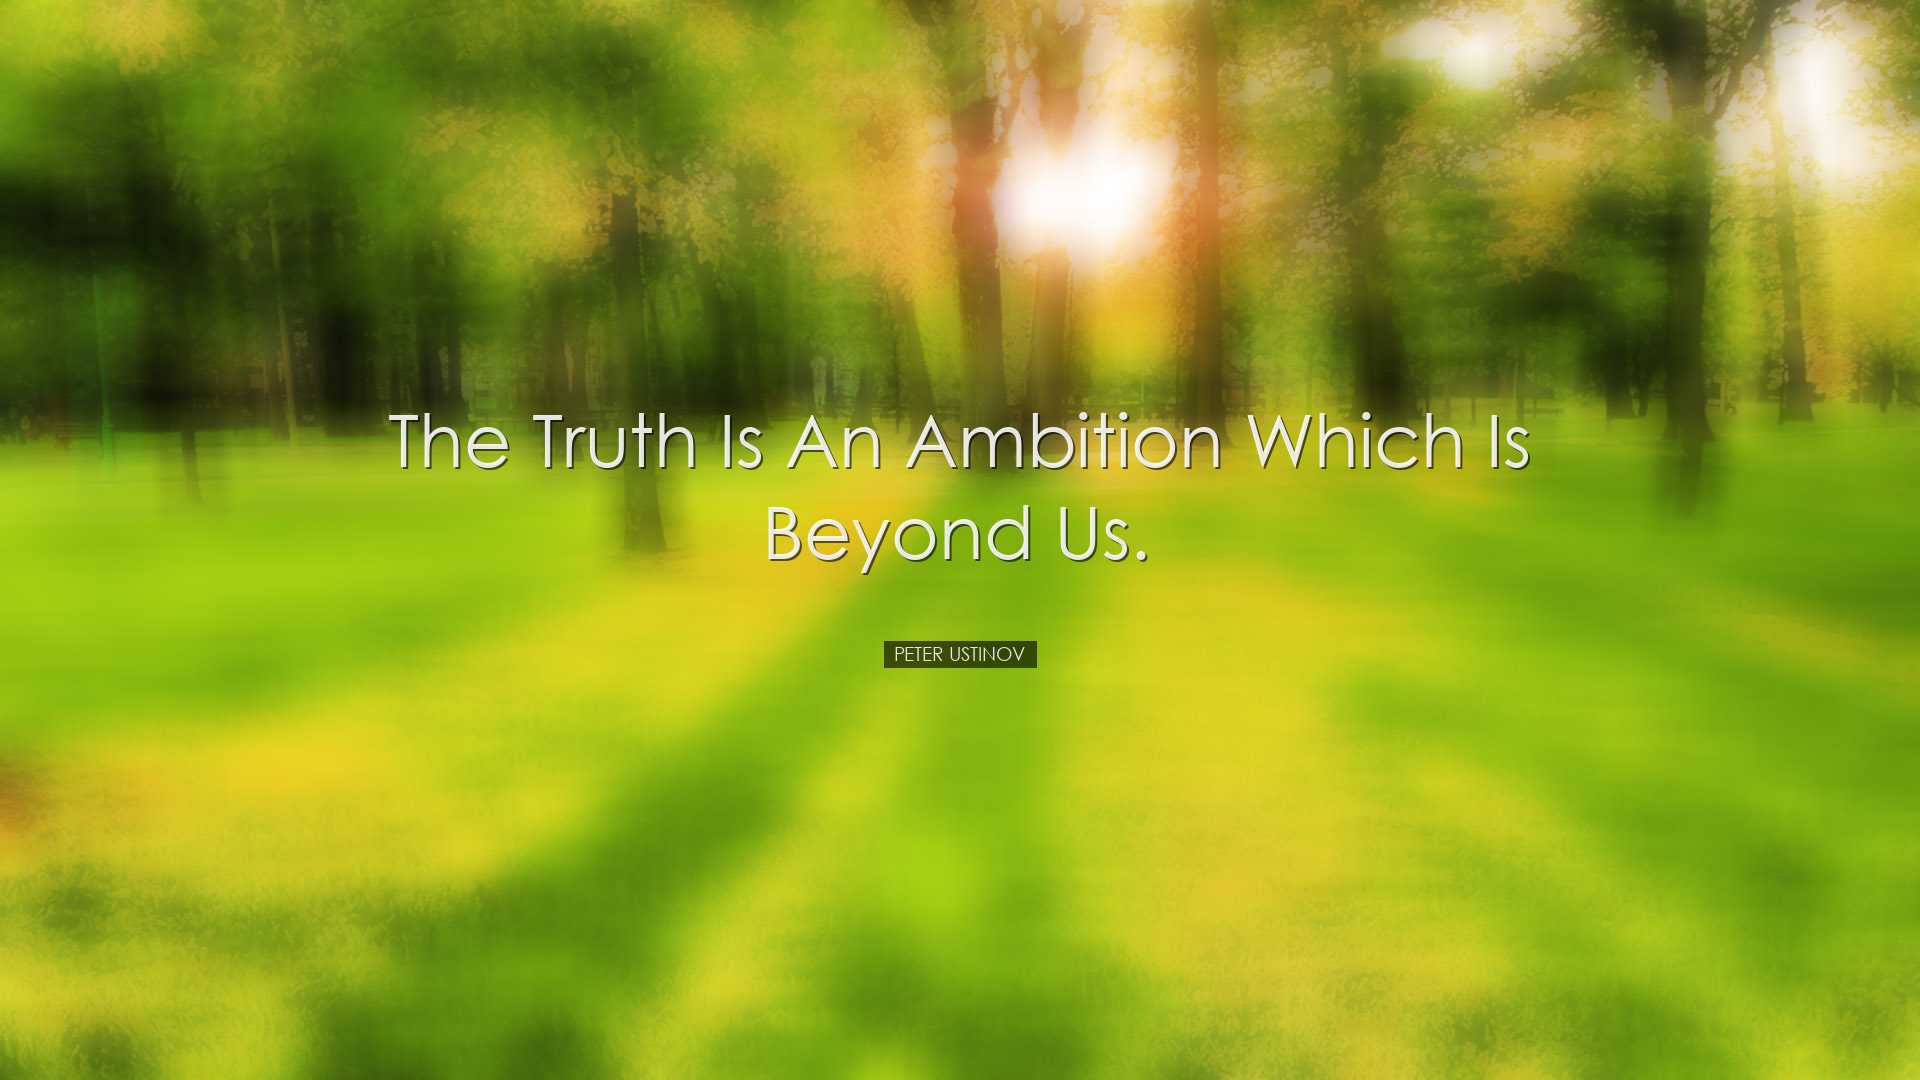 The truth is an ambition which is beyond us. - Peter Ustinov